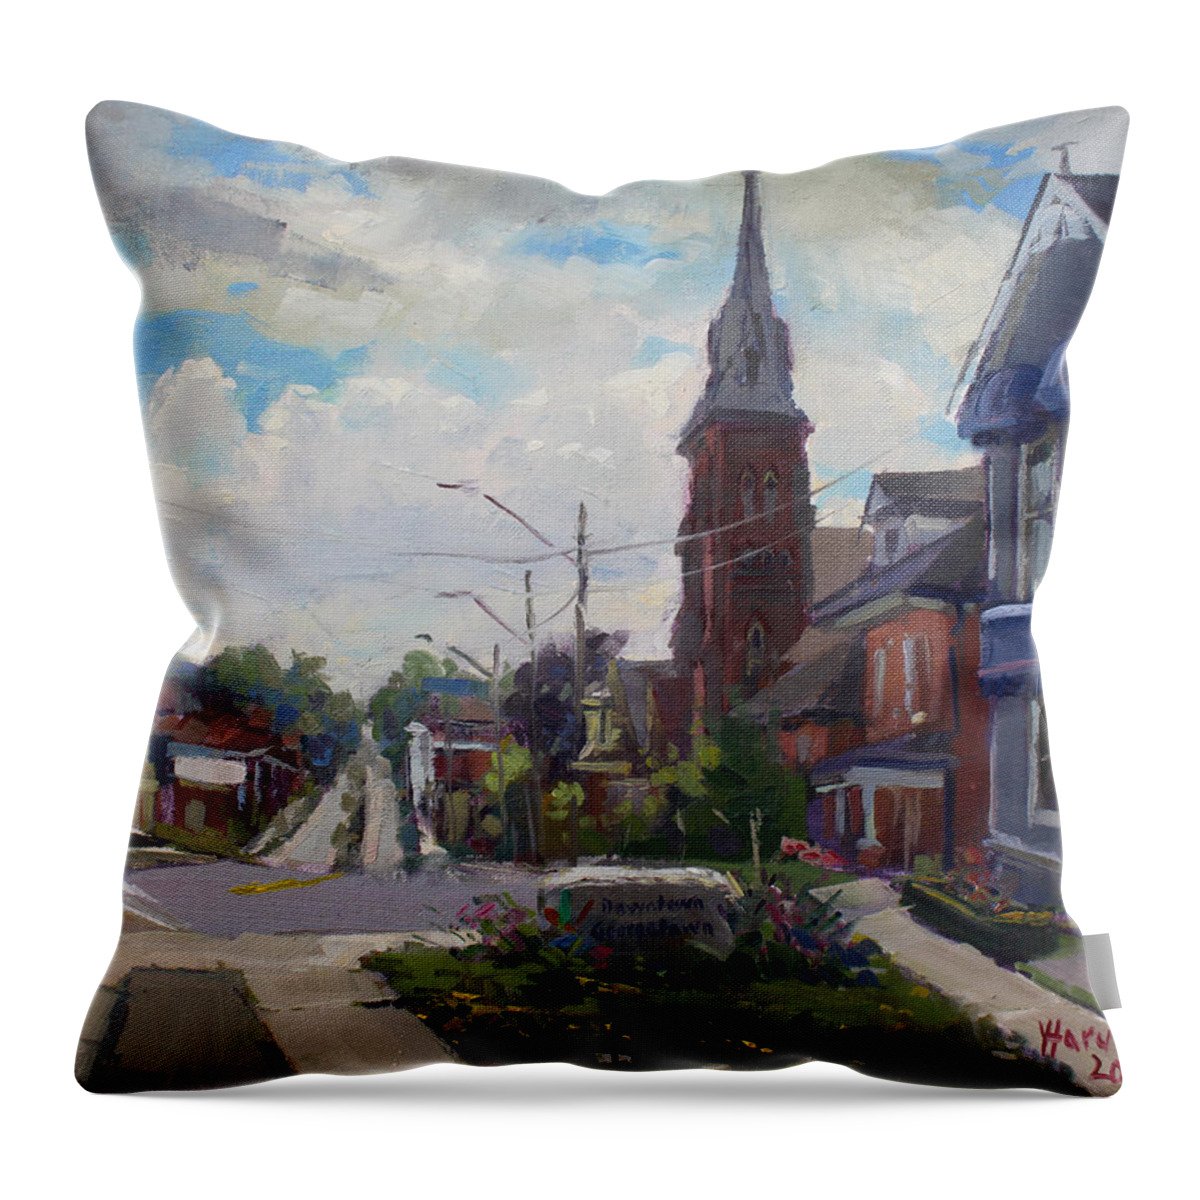 Storm Approach Throw Pillow featuring the painting Storm Approach over Downtown Georgetown by Ylli Haruni